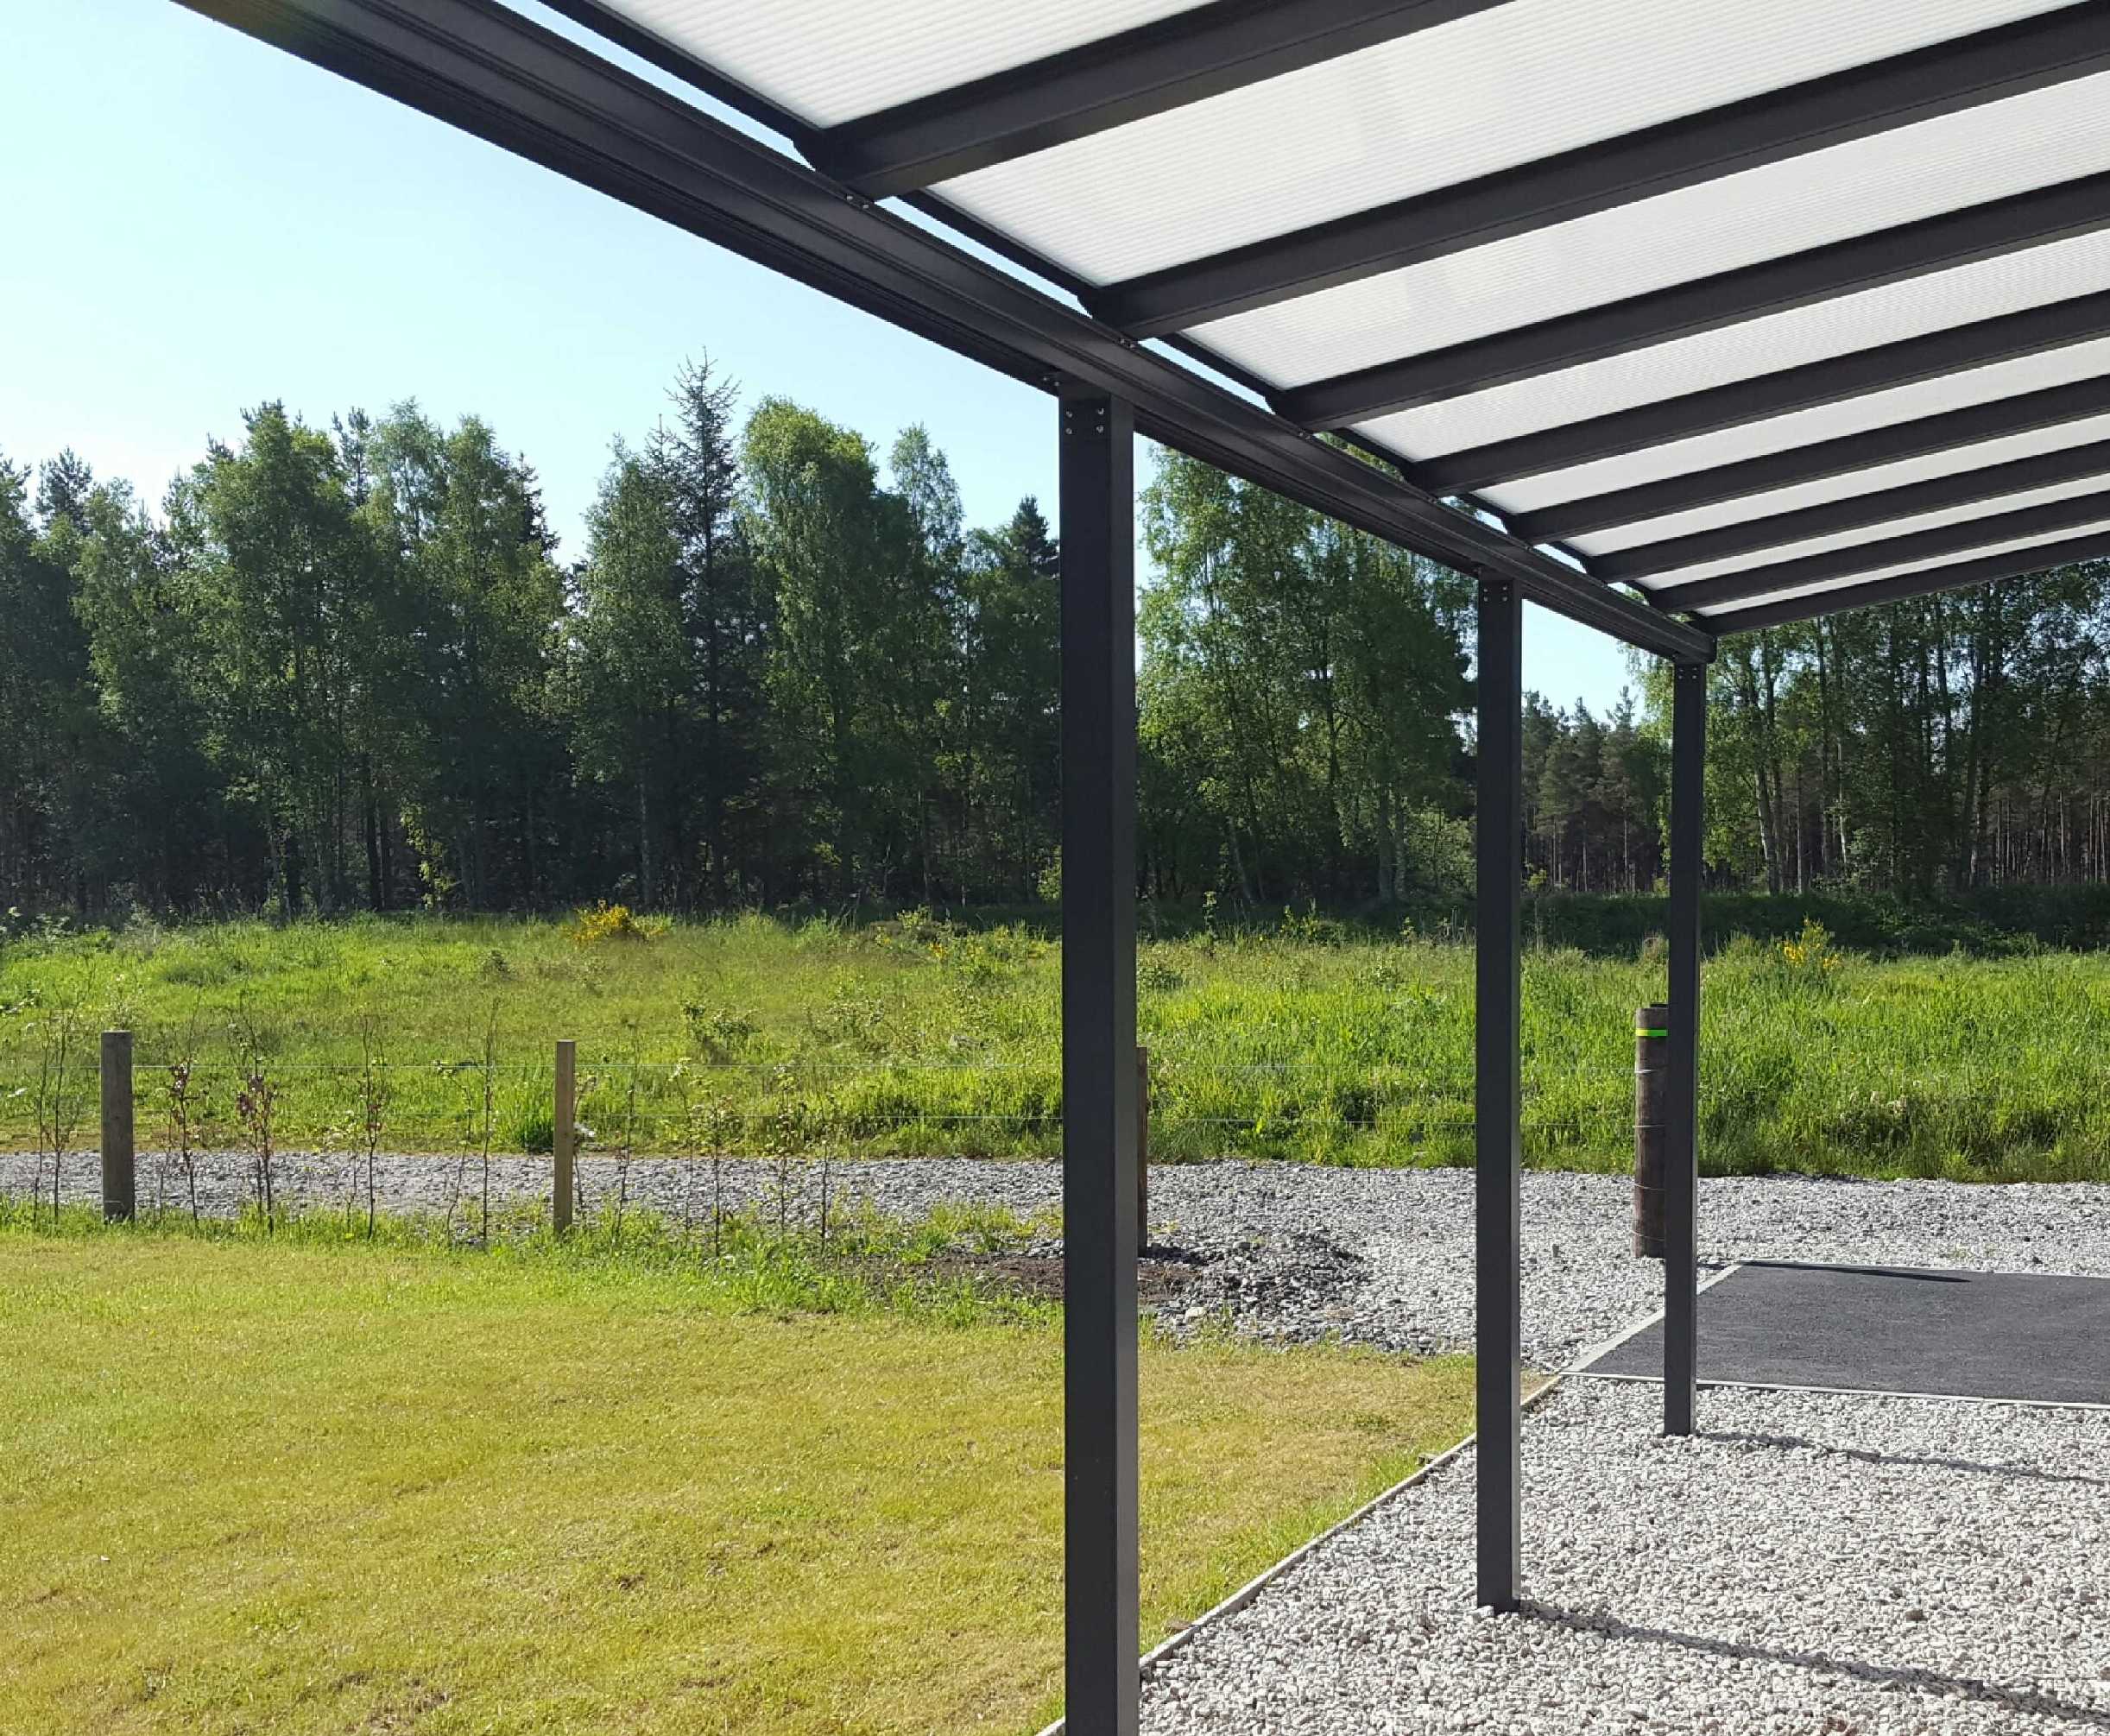 SPECIAL OFFER Omega Smart Lean-To Canopy, Anthracite Grey, 16mm Polycarbonate Glazing - 5.0m (W) x 2.0m (P), (3) Supporting Posts